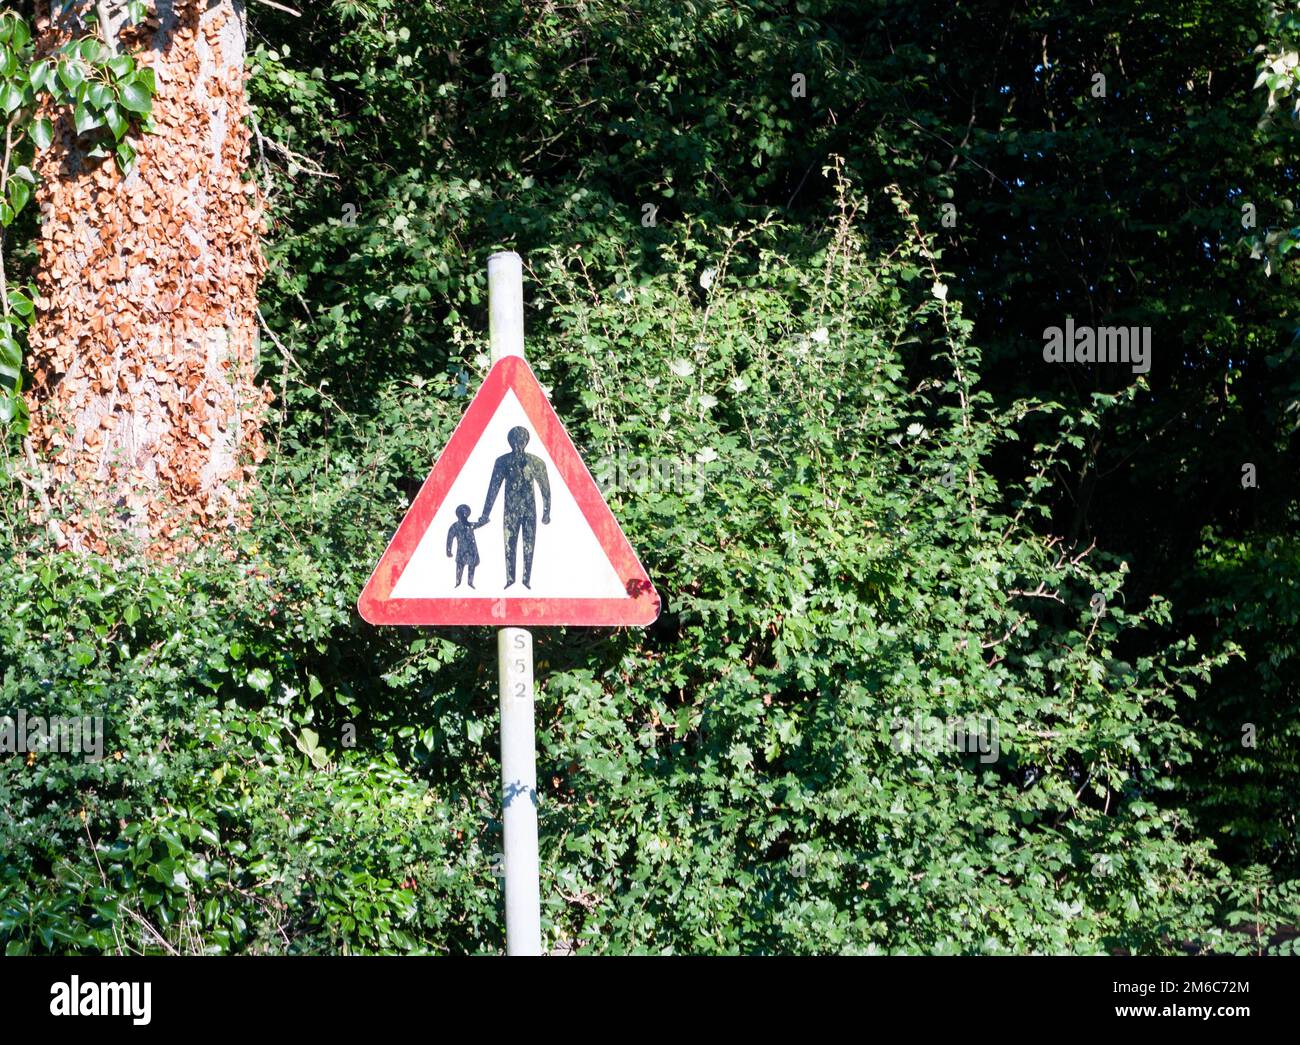 A red triangle street road sign with a man and child safety warning Stock Photo